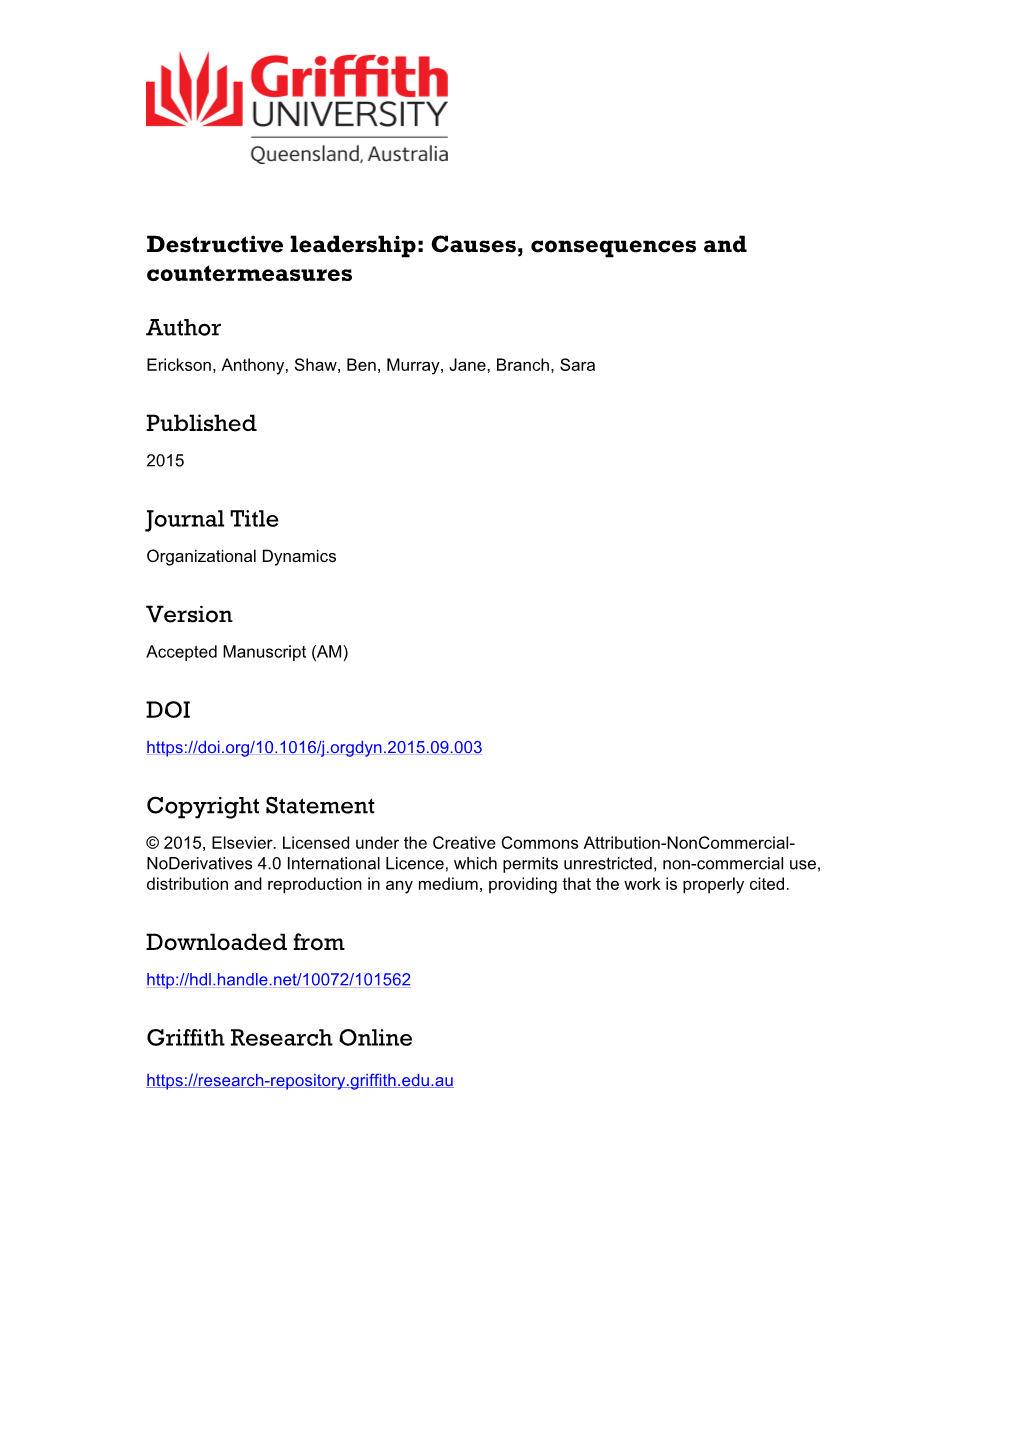 Destructive Leadership: Causes, Consequences and Countermeasures